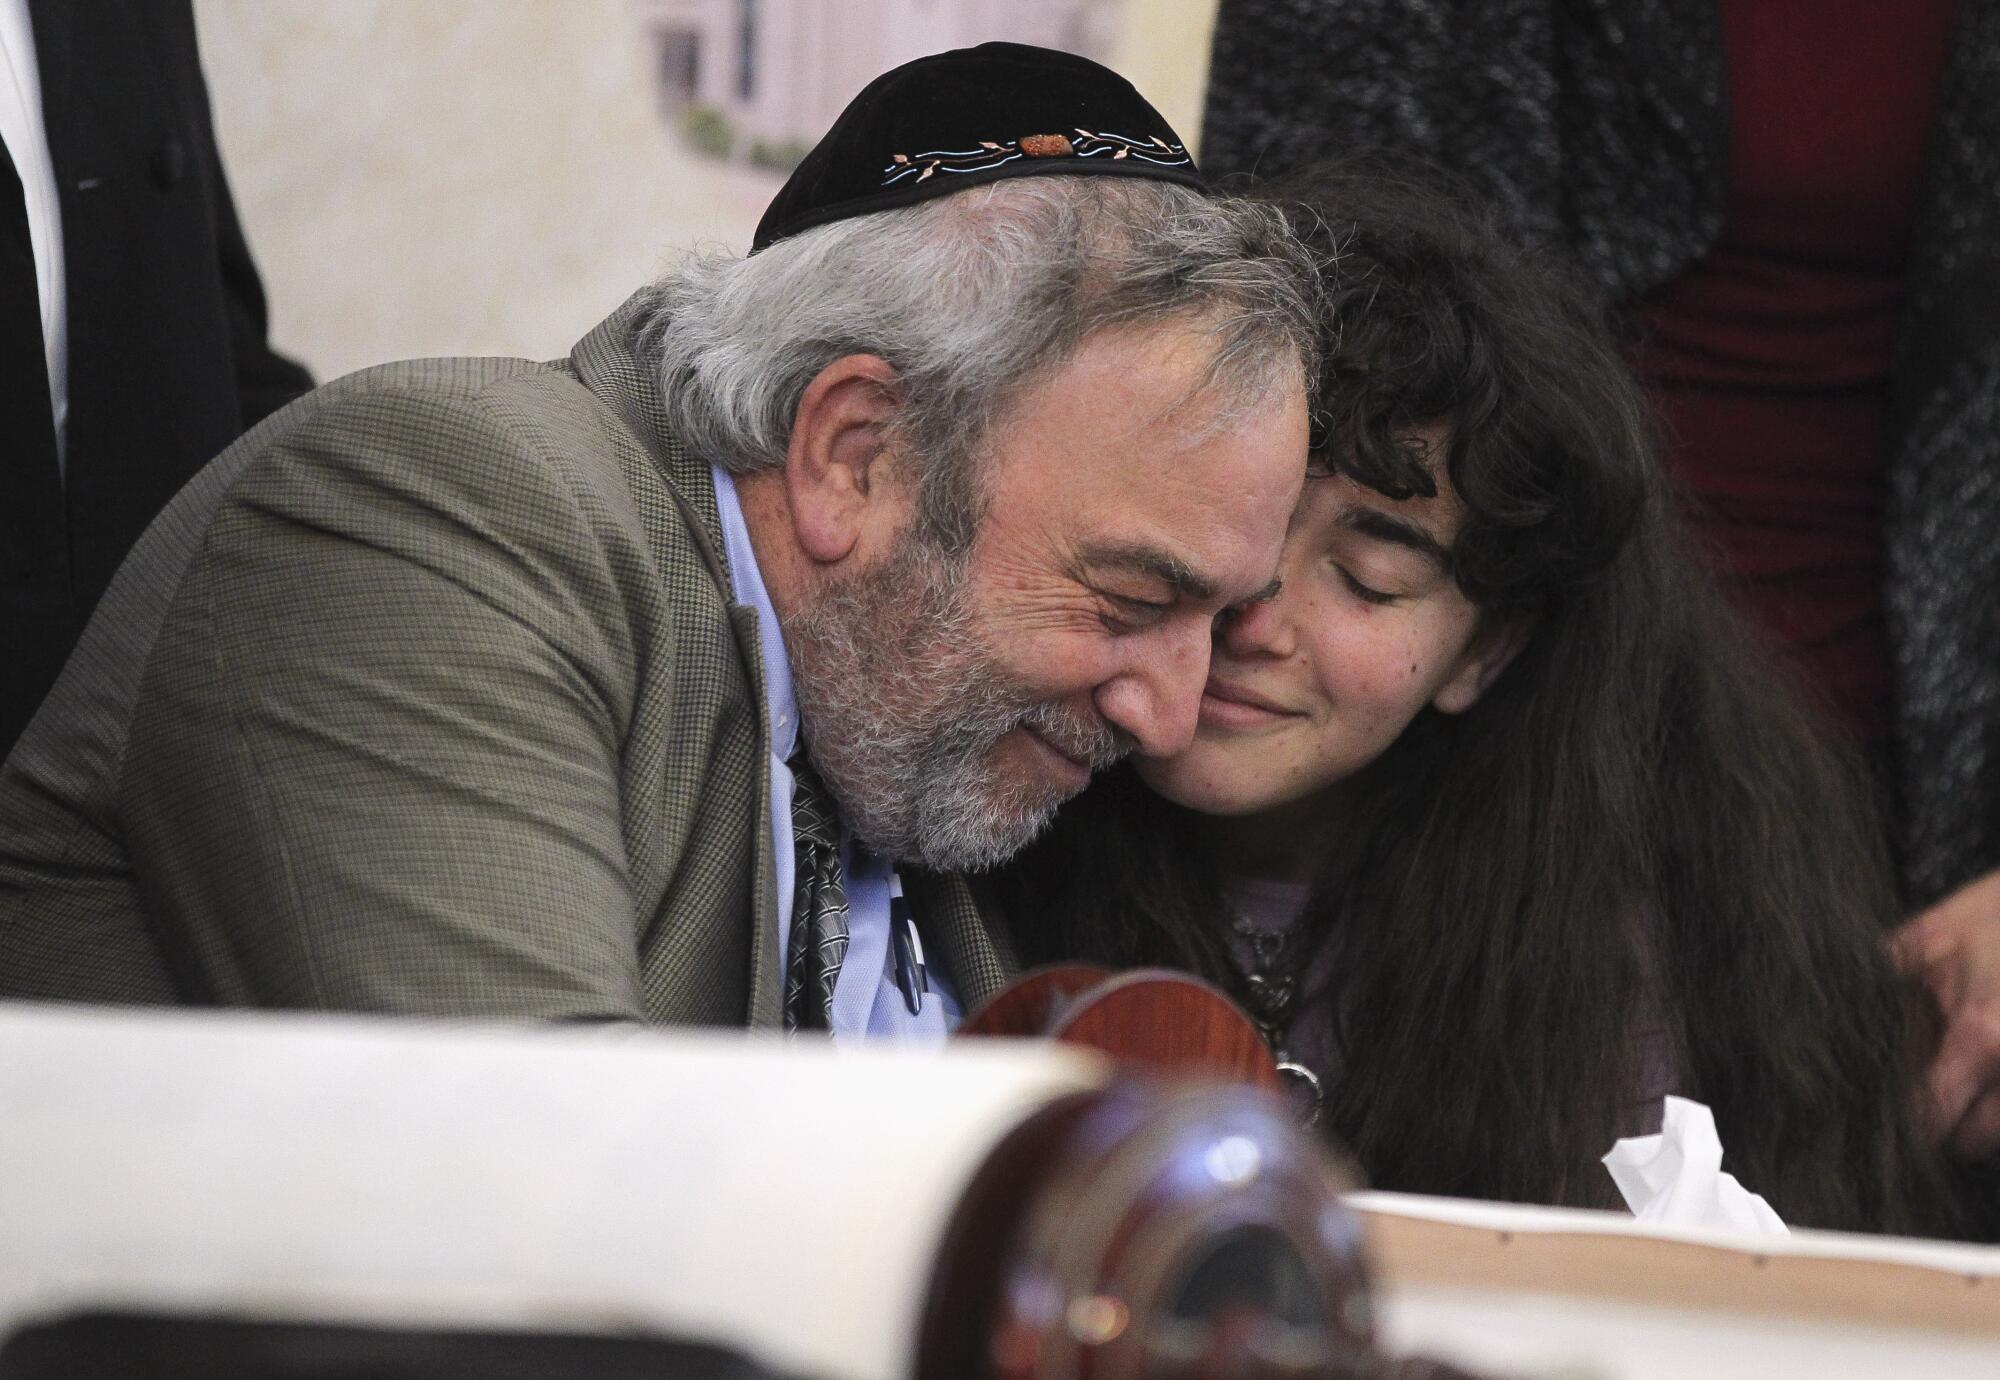 Howard Kaye, center, and his daughter Hannah Kaye hug after the final letter was inked into the new torah that's dedicated to wife and mother Lori Gilbert-Kaye, who was killed when a gunman attacked last April, during a celebration for the new torah at Chabad of Poway on Wednesday, May 22, 2019 in Poway, California.